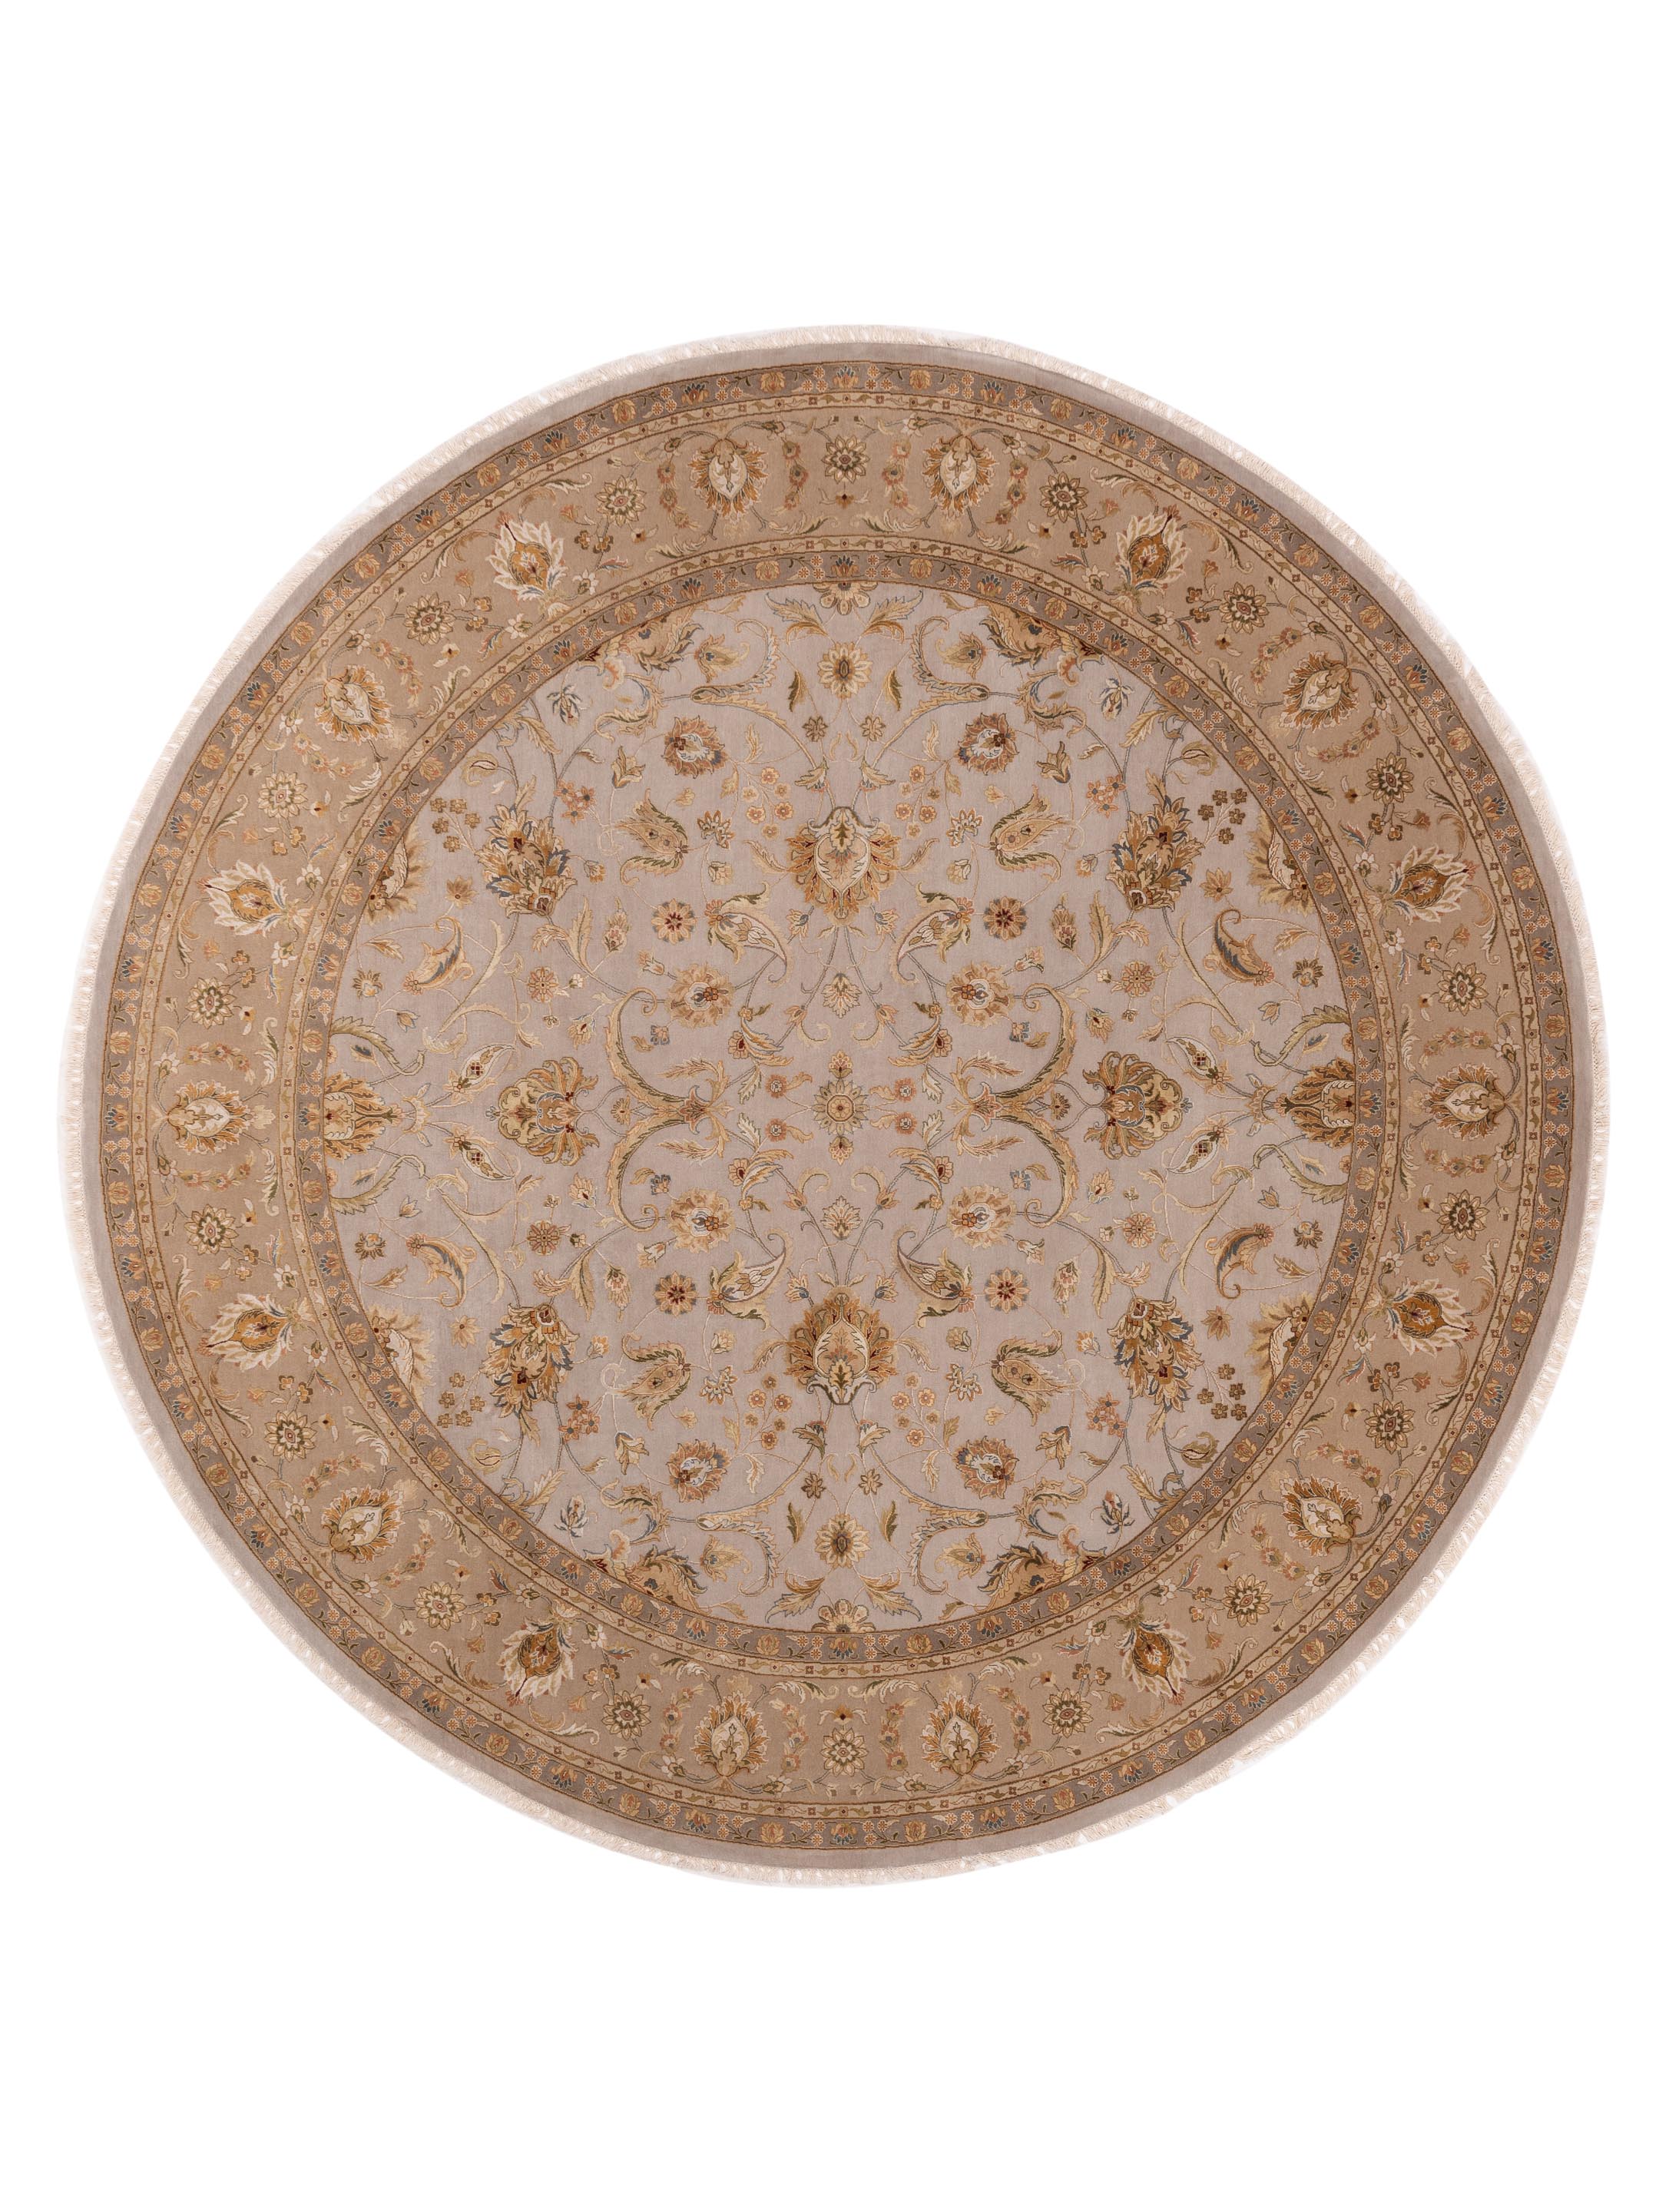 Imperial Silk Traditional Beige Gold 10x10 Round Area Rug	